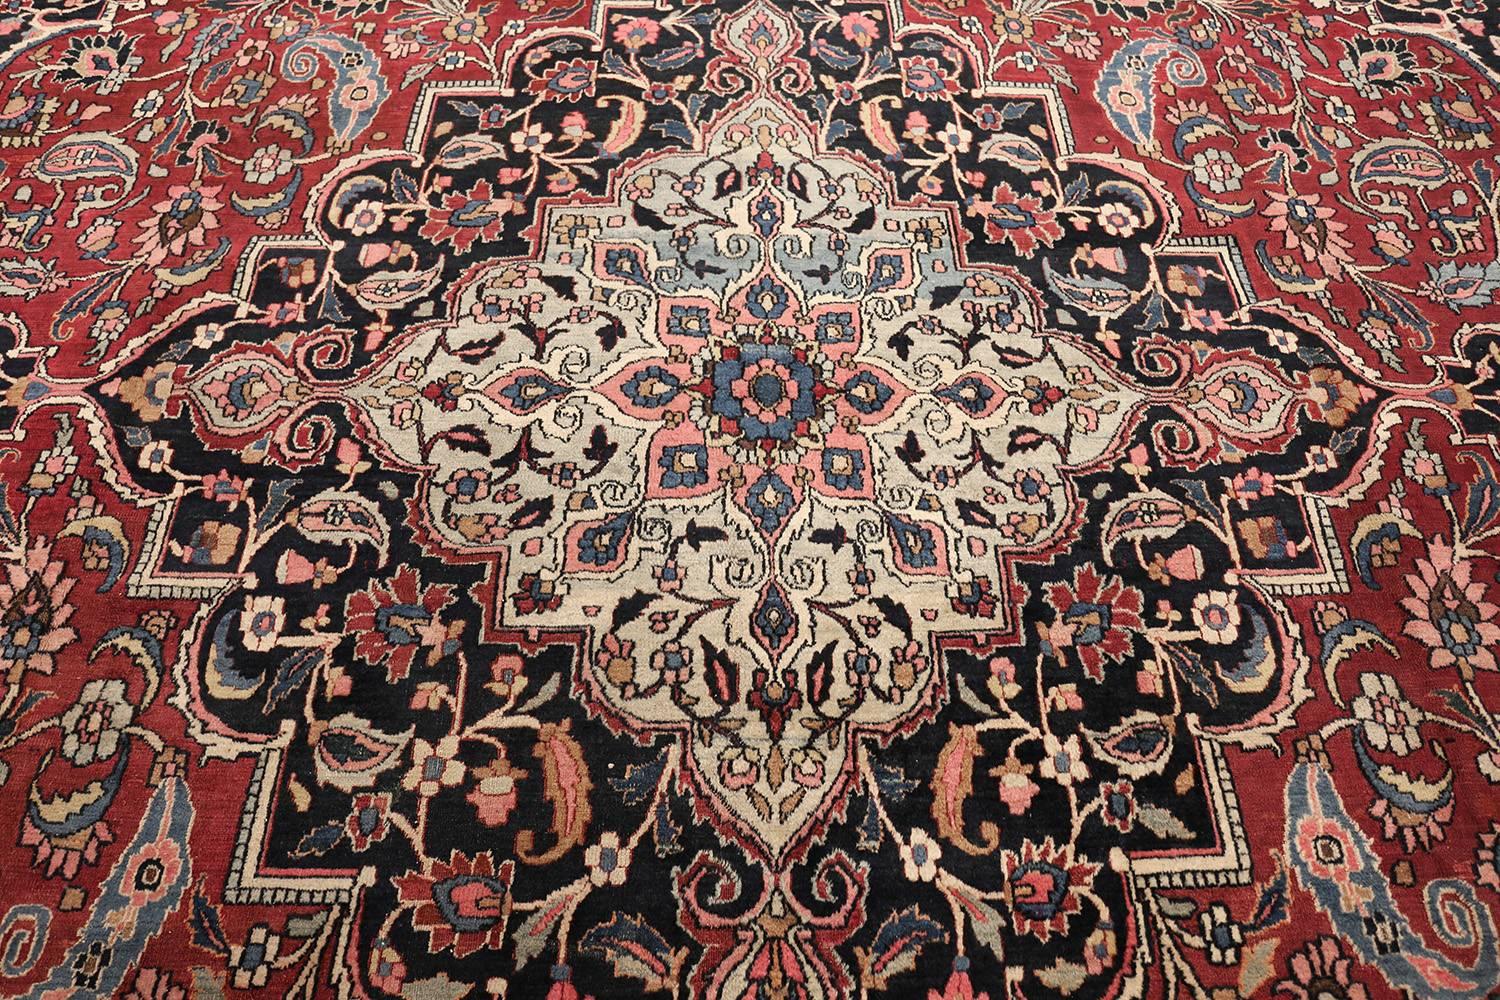 20th Century Oversized Fine Antique Persian Khorassan Mashad Rug. Size: 15 ft 6 in x 20 ft 